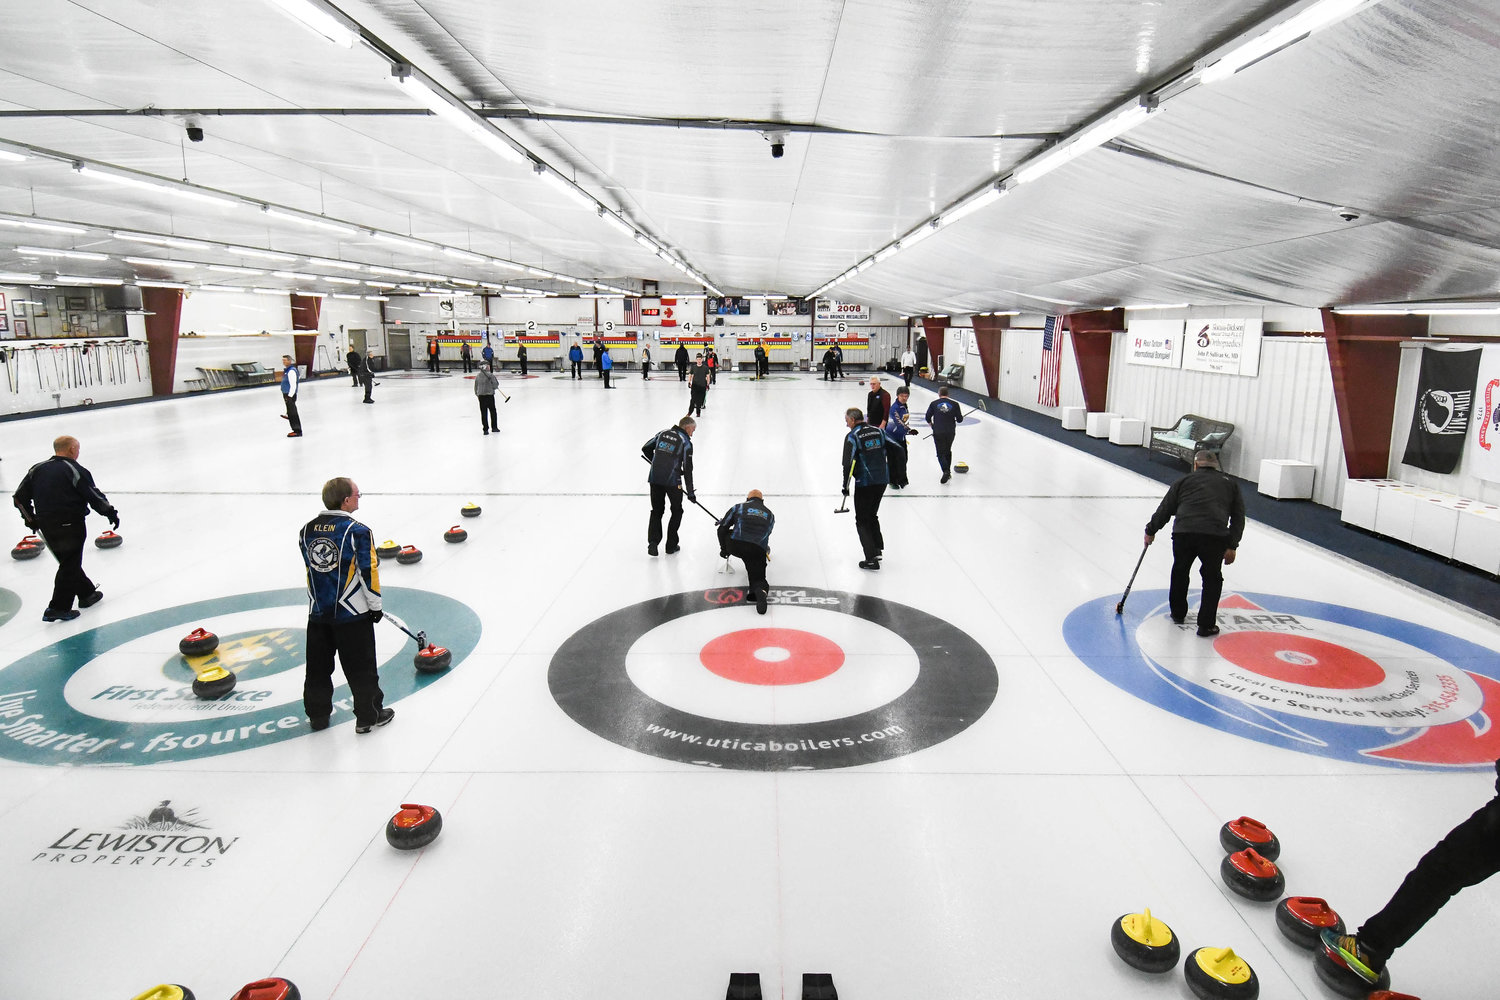 Teams compete in the 53rd annual Ross Tarlton International Bonspiel on Friday afternoon at the Utica Curling Club in Whitesboro.